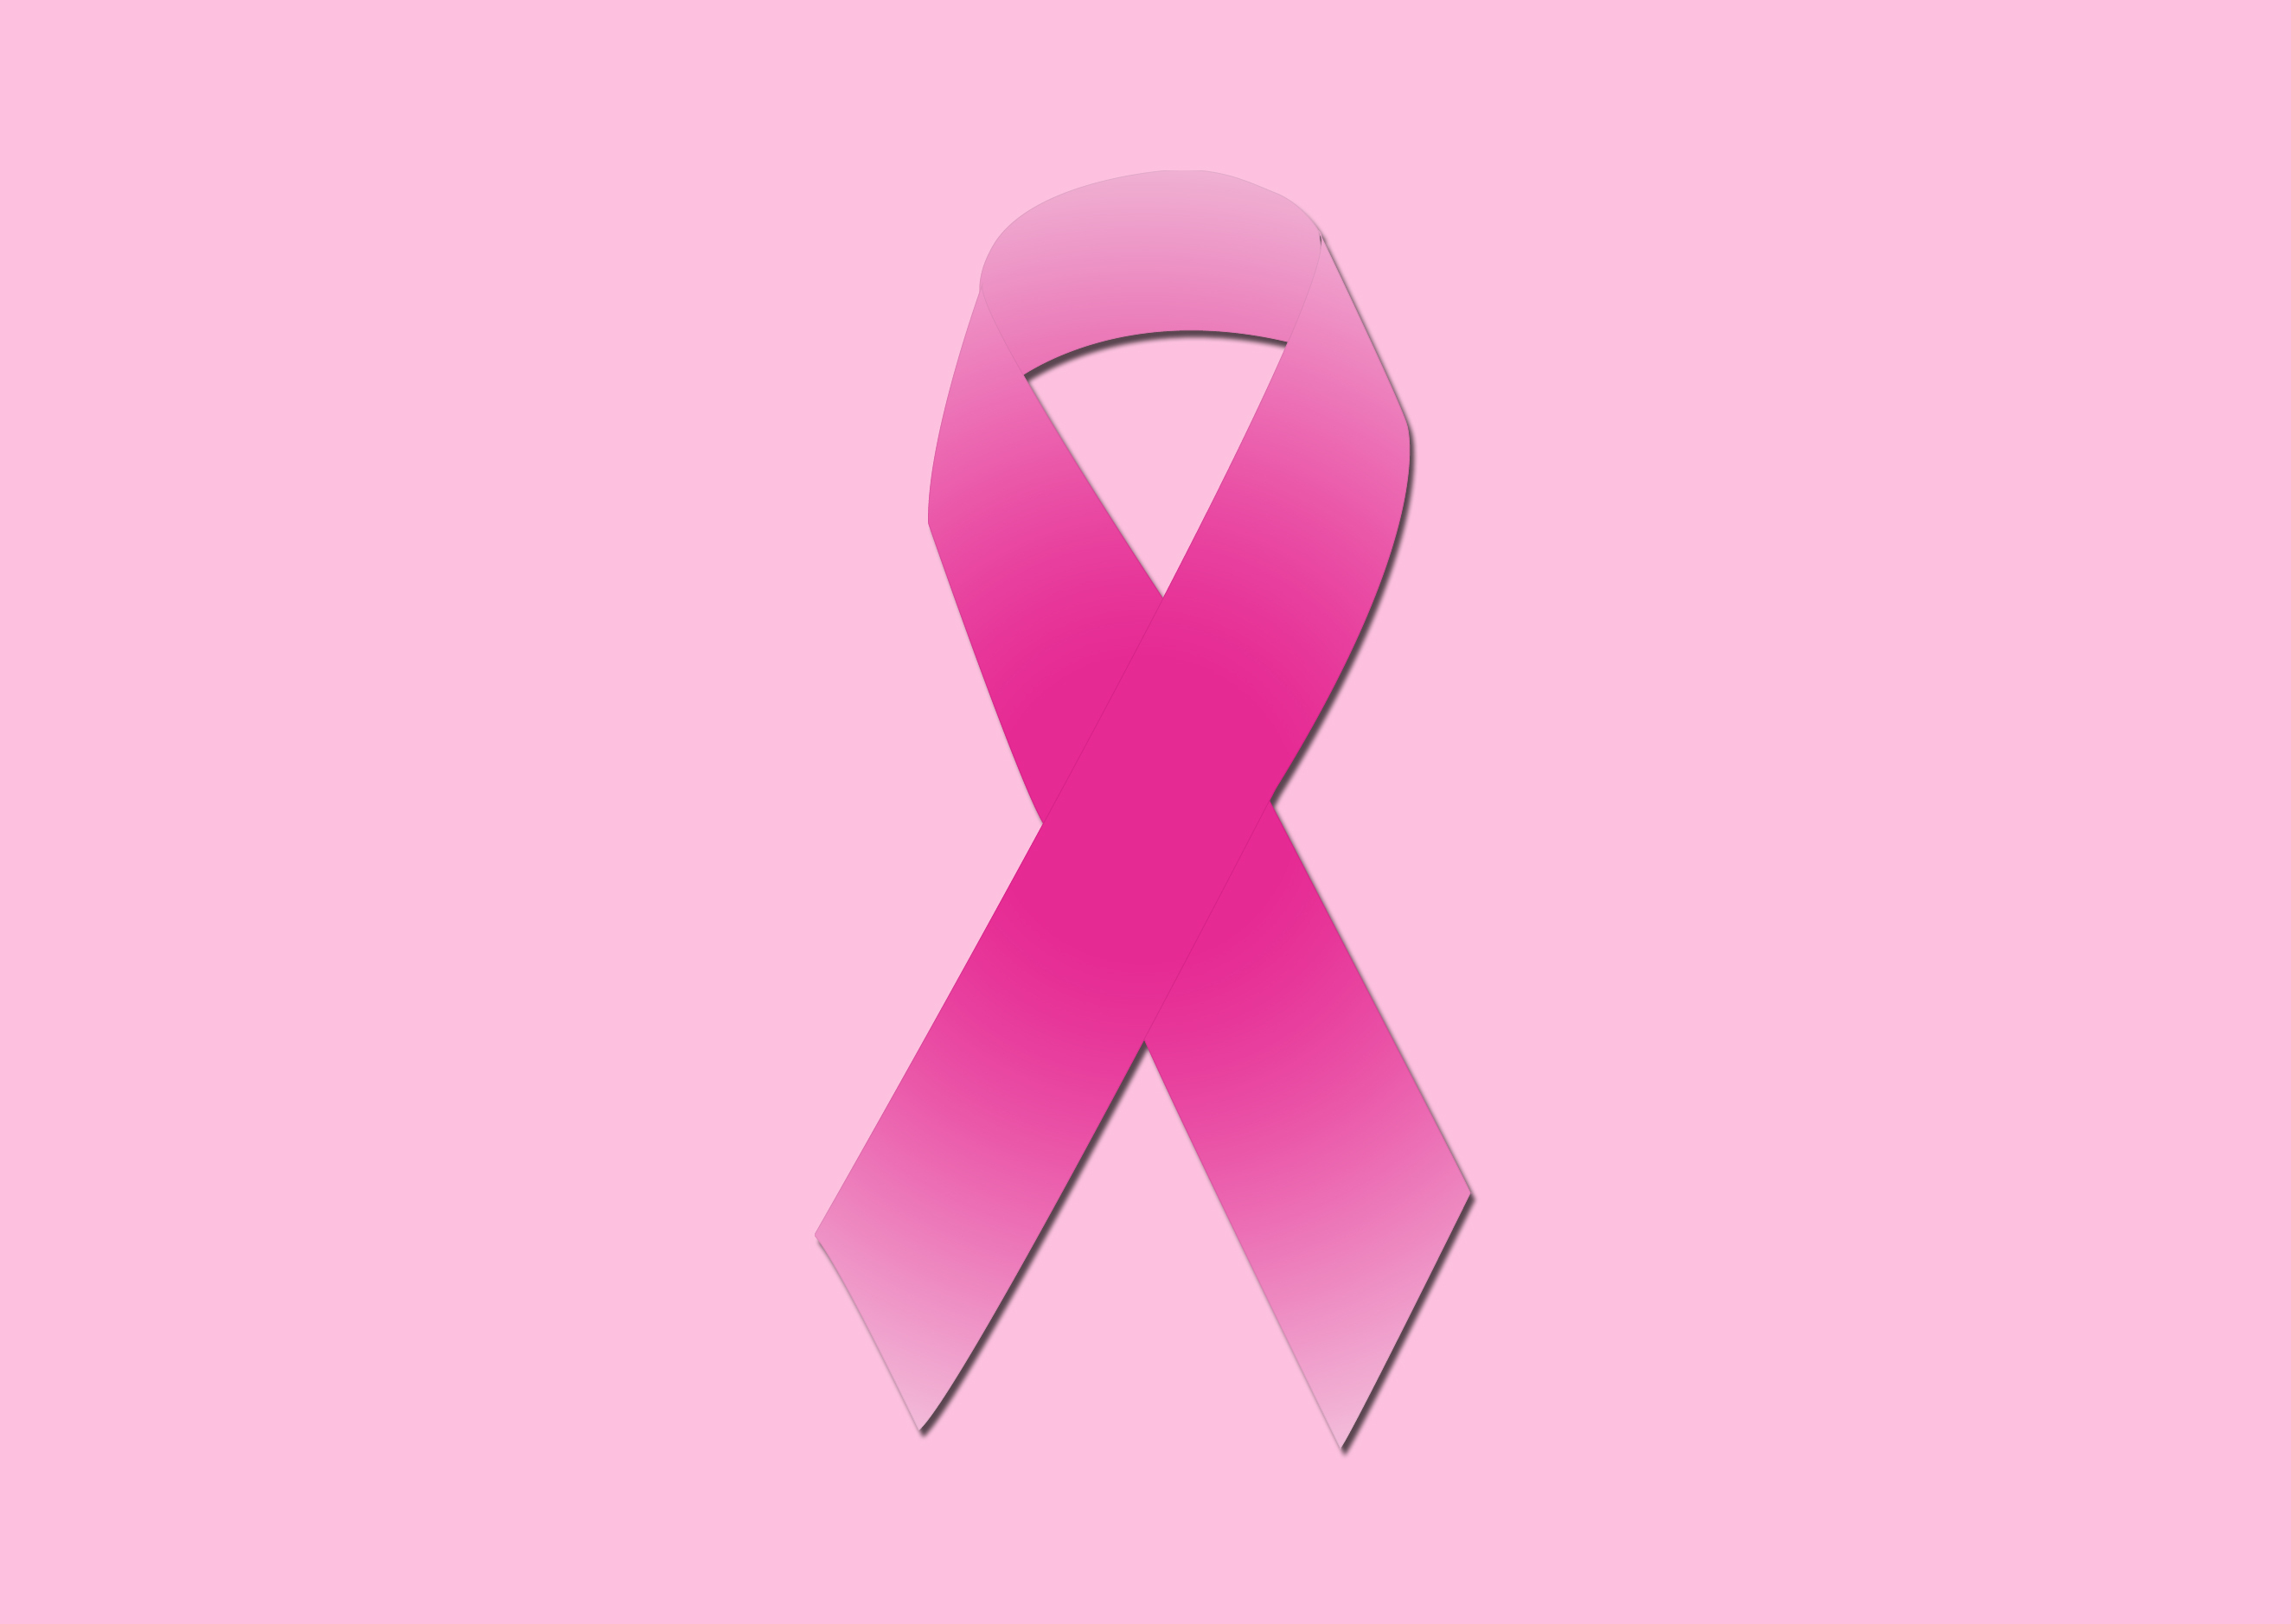 October+is+Breast+Cancer+Awareness+Month+and+members+of+the+4th+Medical+Group+have+geared+up+to+get+the+word+out+about+early+detection+and+prevention.+Be+on+the+lookout+for+breast+cancer+awareness+signs+posted+at+various+locations+on+base+throughout+the+month.+For+more+information+concerning+the+disease%2C+call+%28919%29+722-0749.+%28U.S.+Air+Force+photo+illustration+by+Senior+Airman+Aubrey+White%29